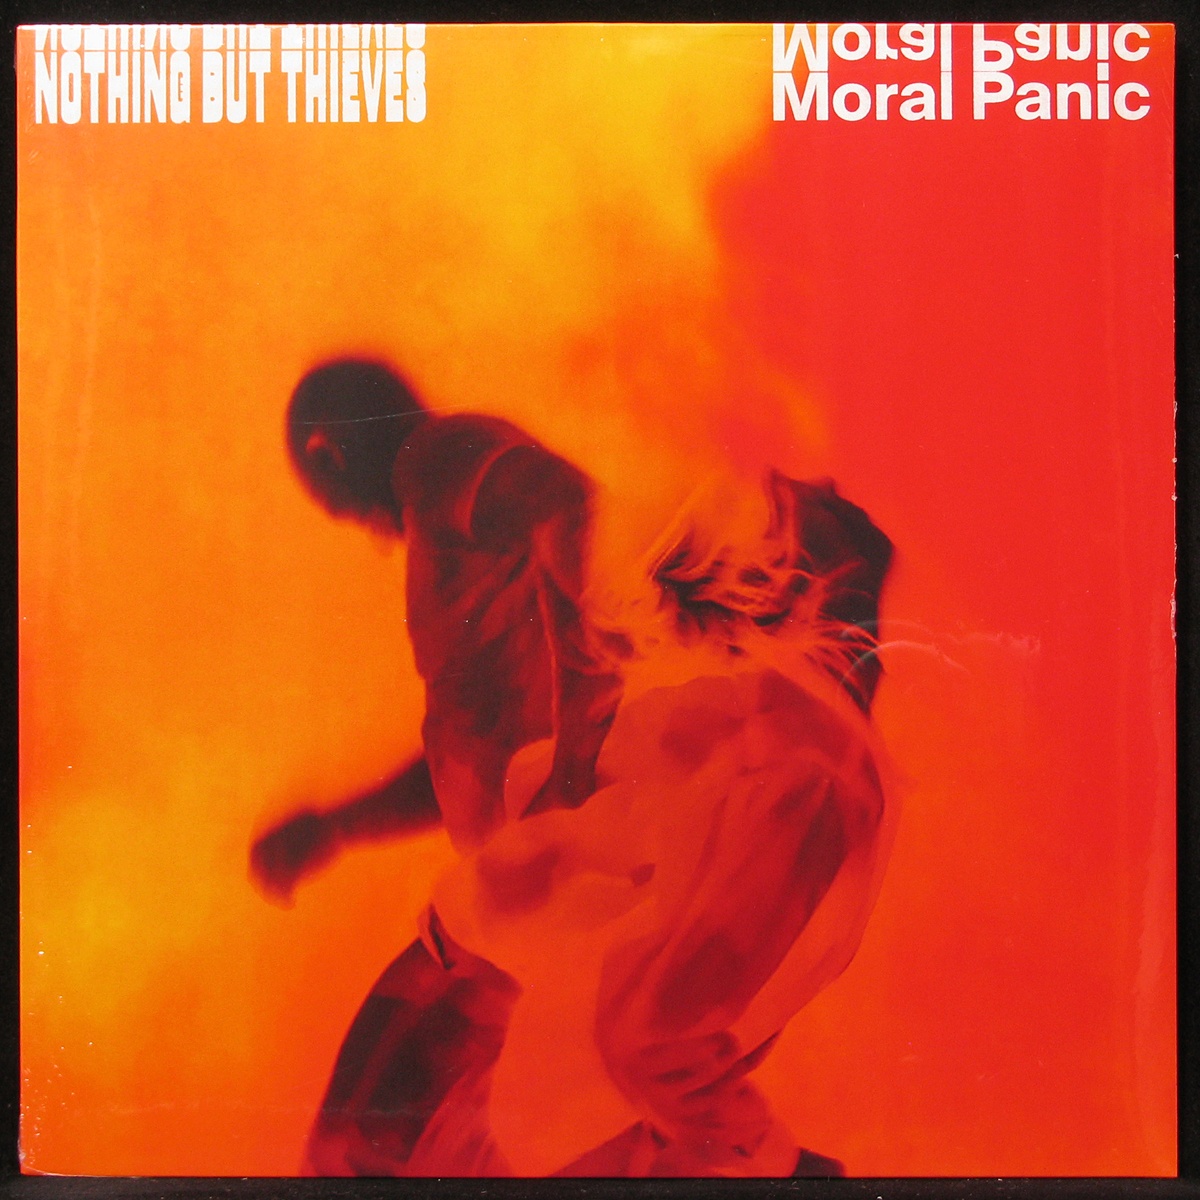 LP Nothing But Thieves — Moral Panic фото